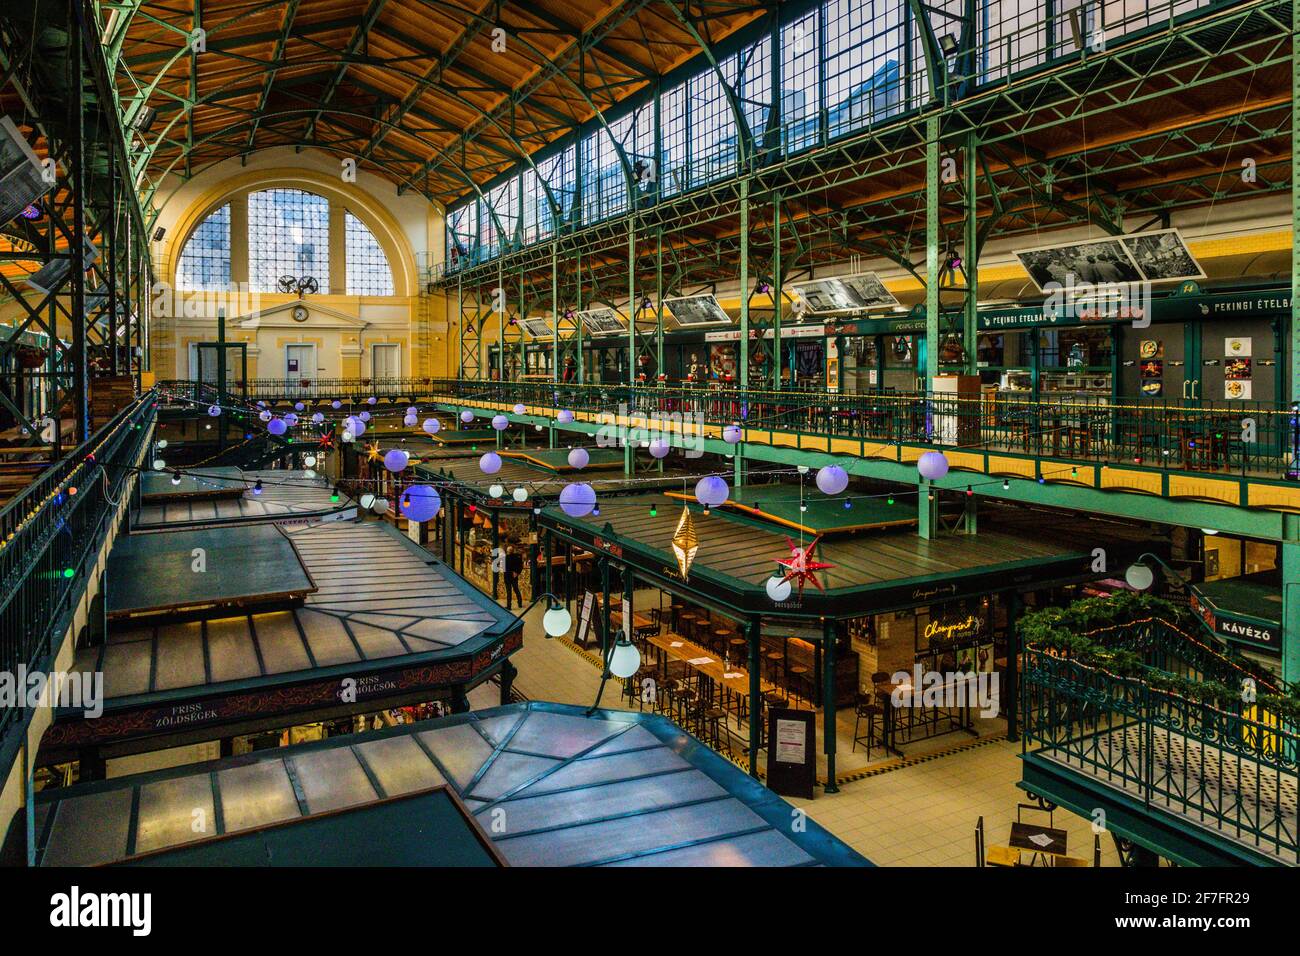 The culinary offer in the Hold Street Market extends over two levels. In contrast to the concept of the food courts, in which vendors share all the seating for their guests, in the Hold Street Market each restaurateur has his own seating area Stock Photo